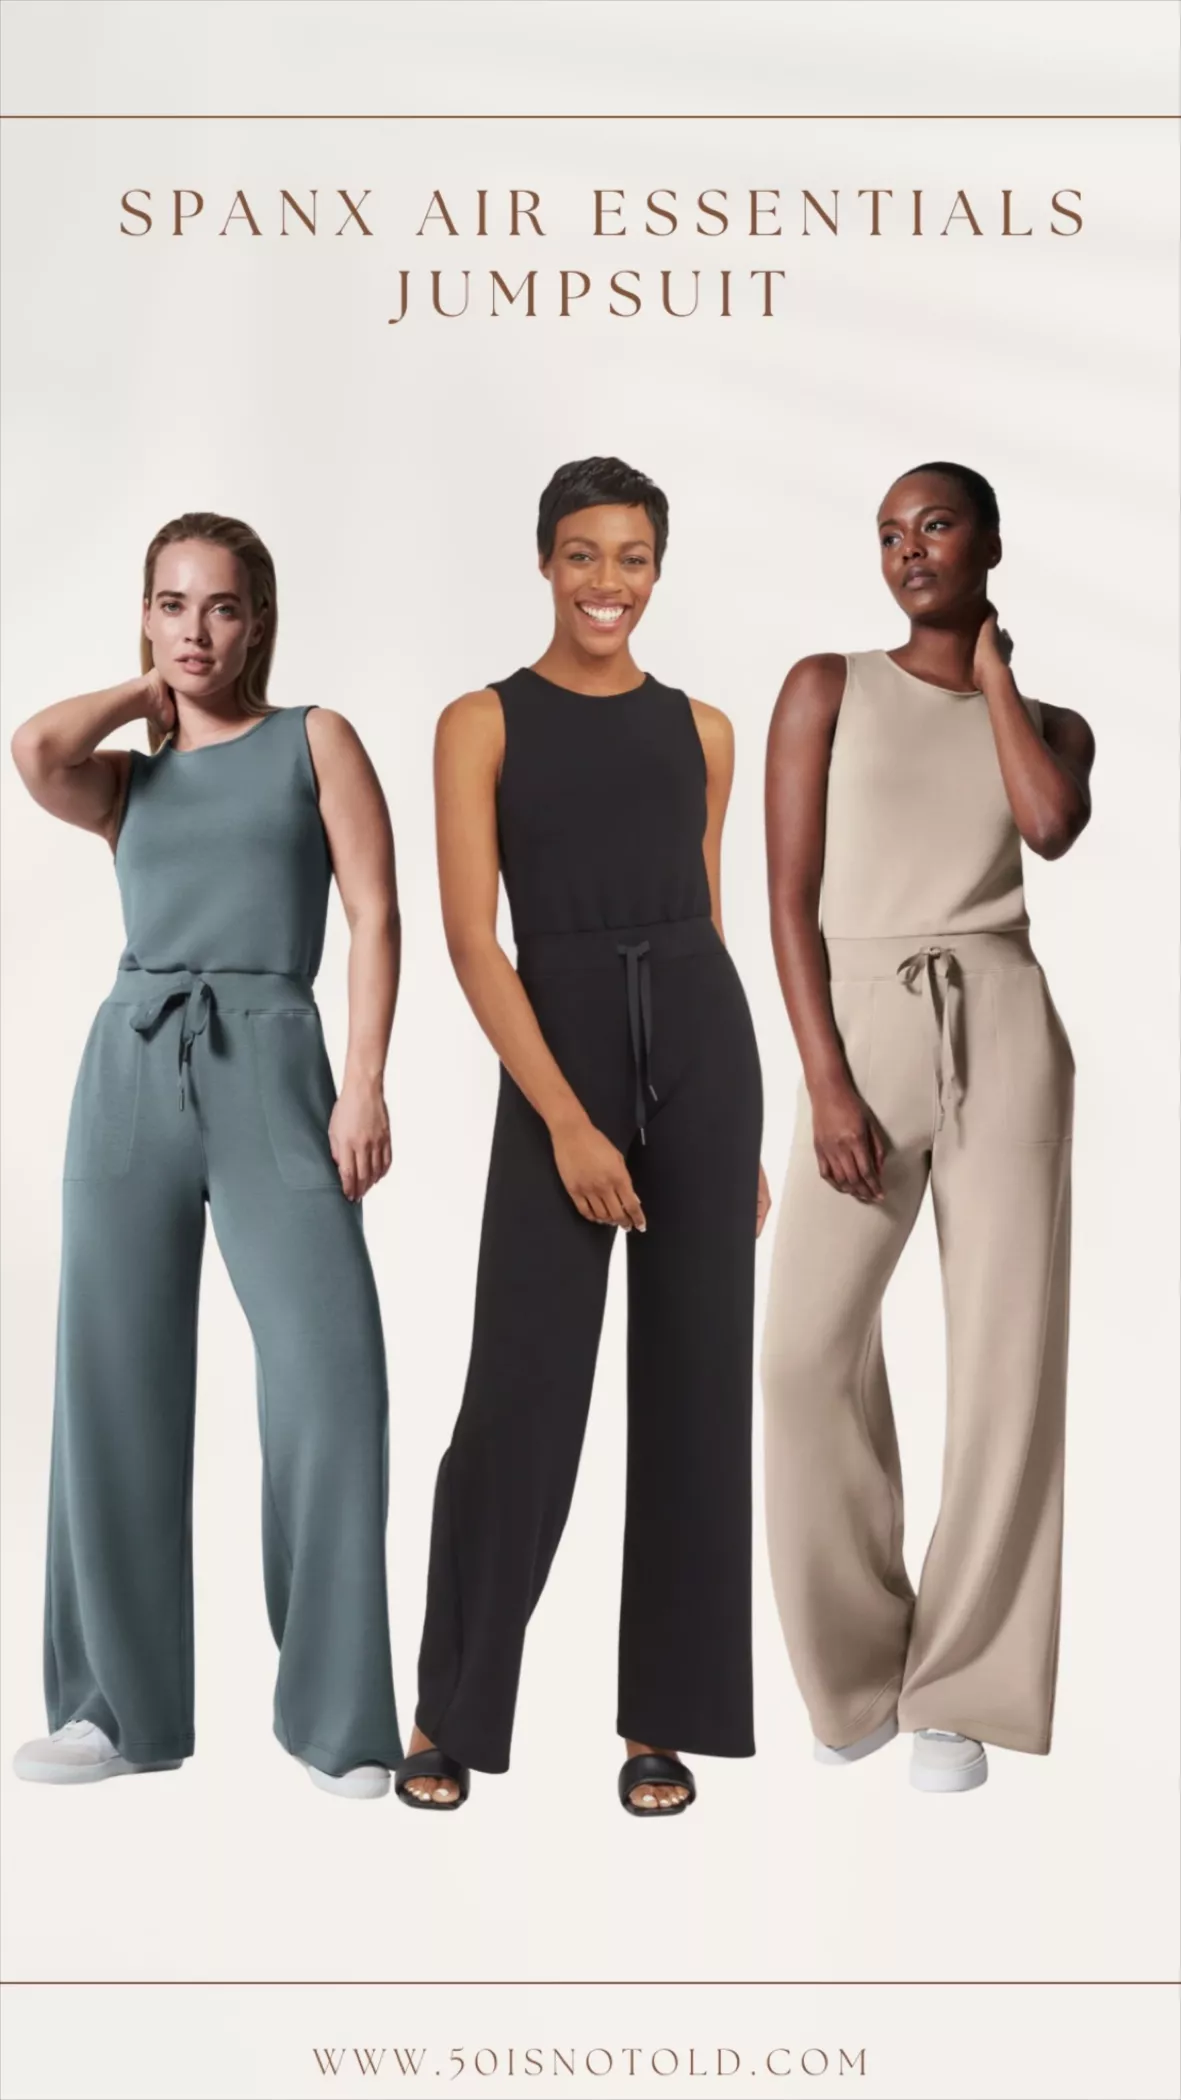 AirEssentials Jumpsuit curated on LTK